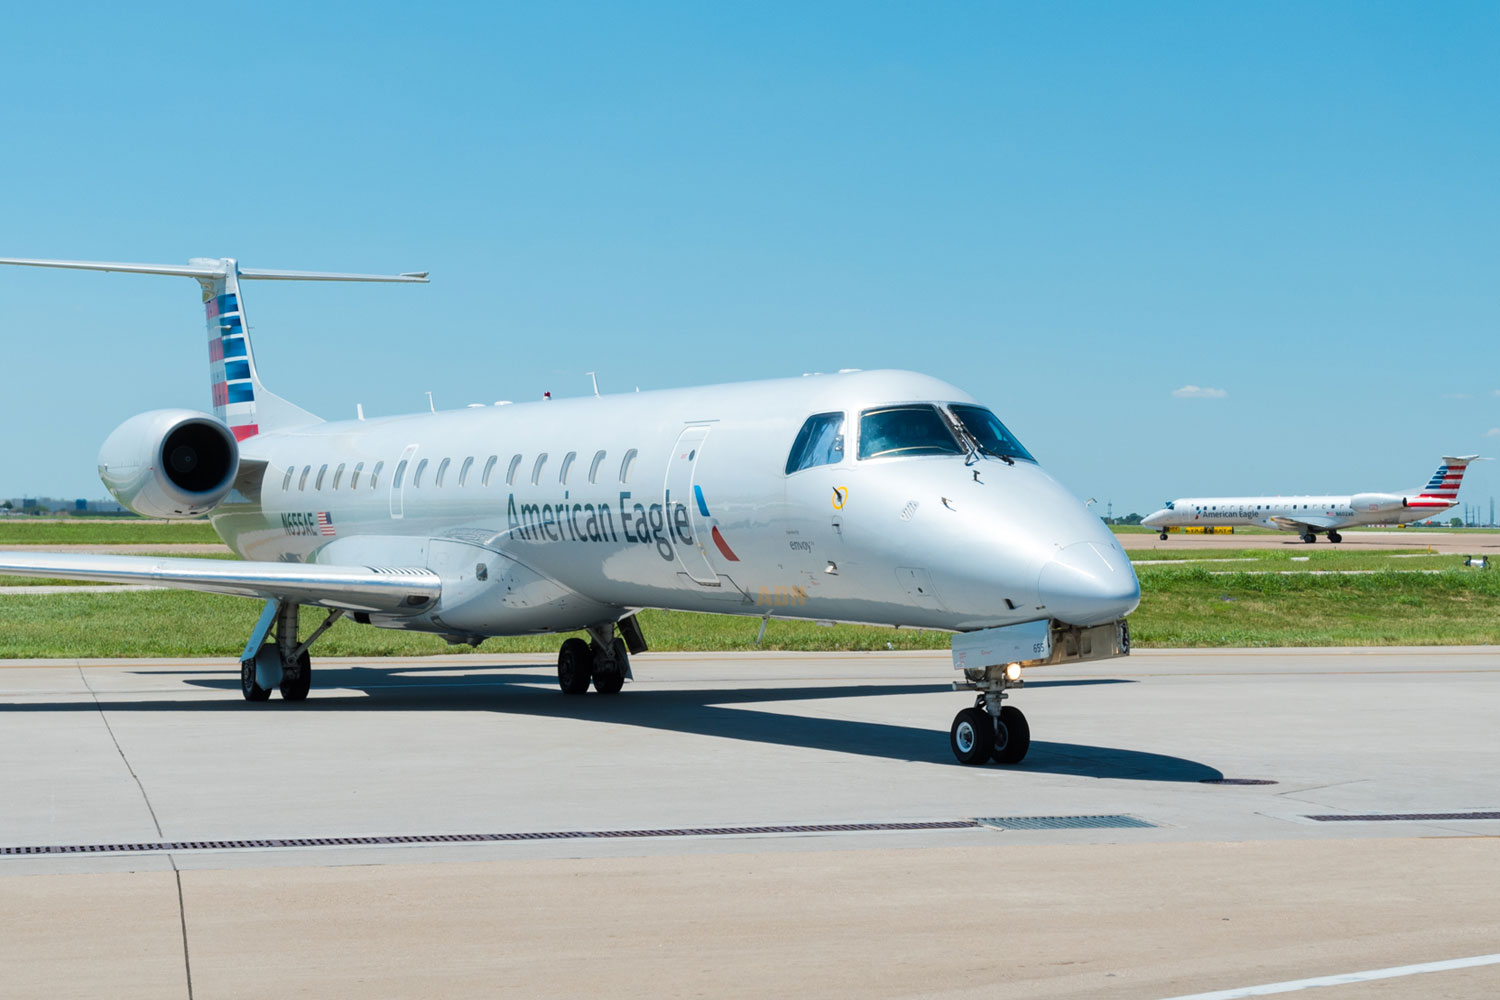 ERJ 145 out, E175 in: US airline to operate with first Embraer jet